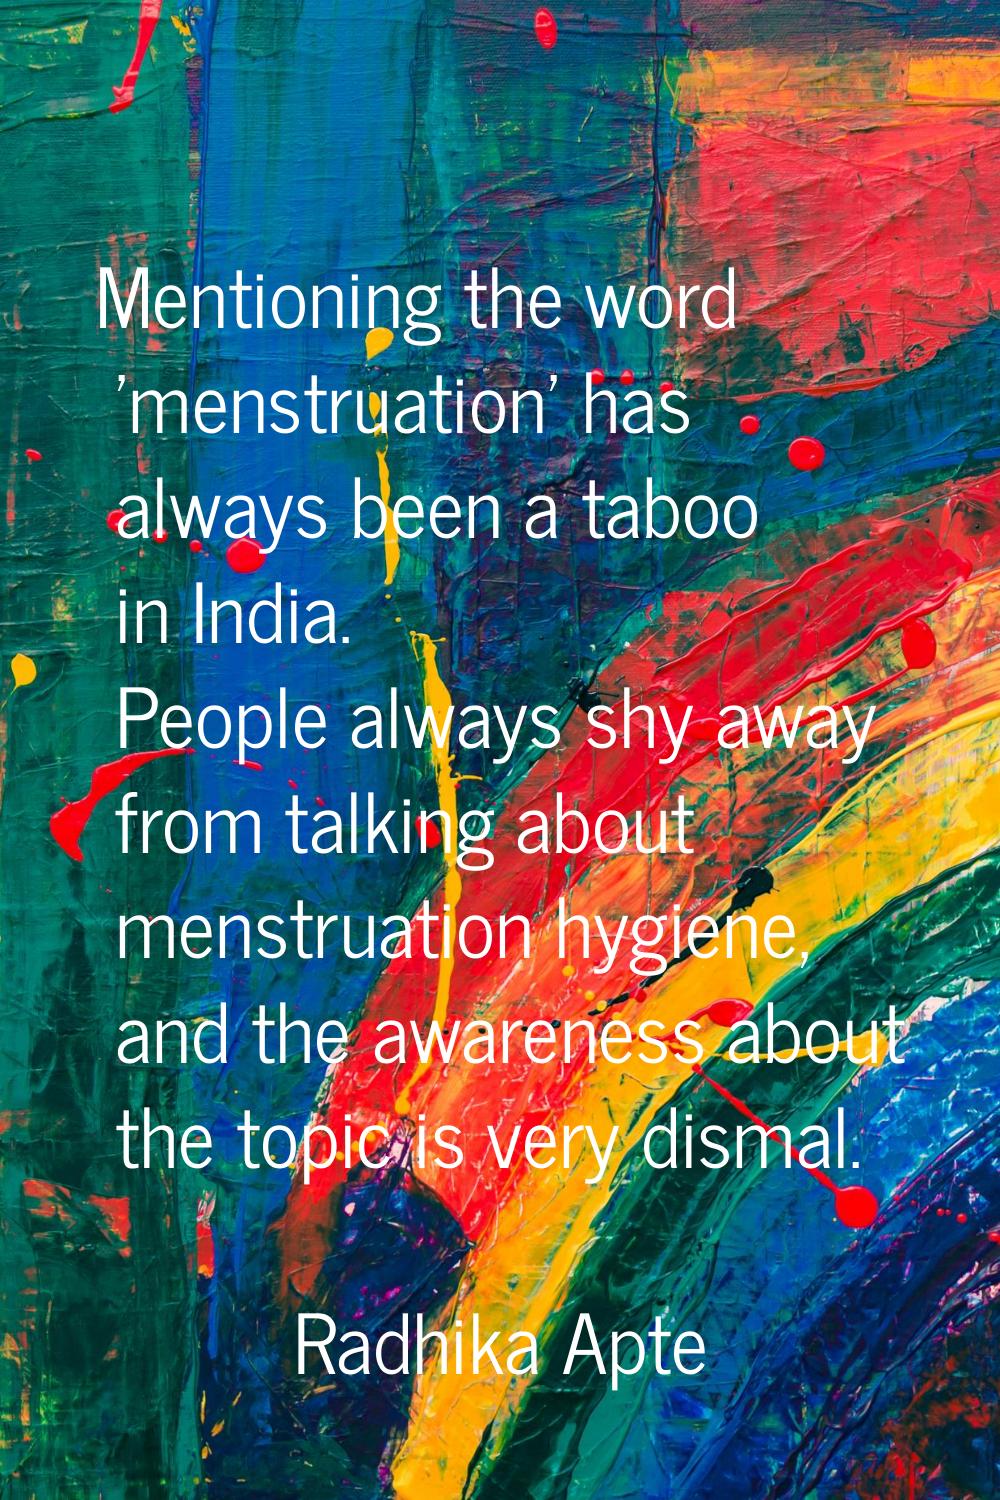 Mentioning the word 'menstruation' has always been a taboo in India. People always shy away from ta